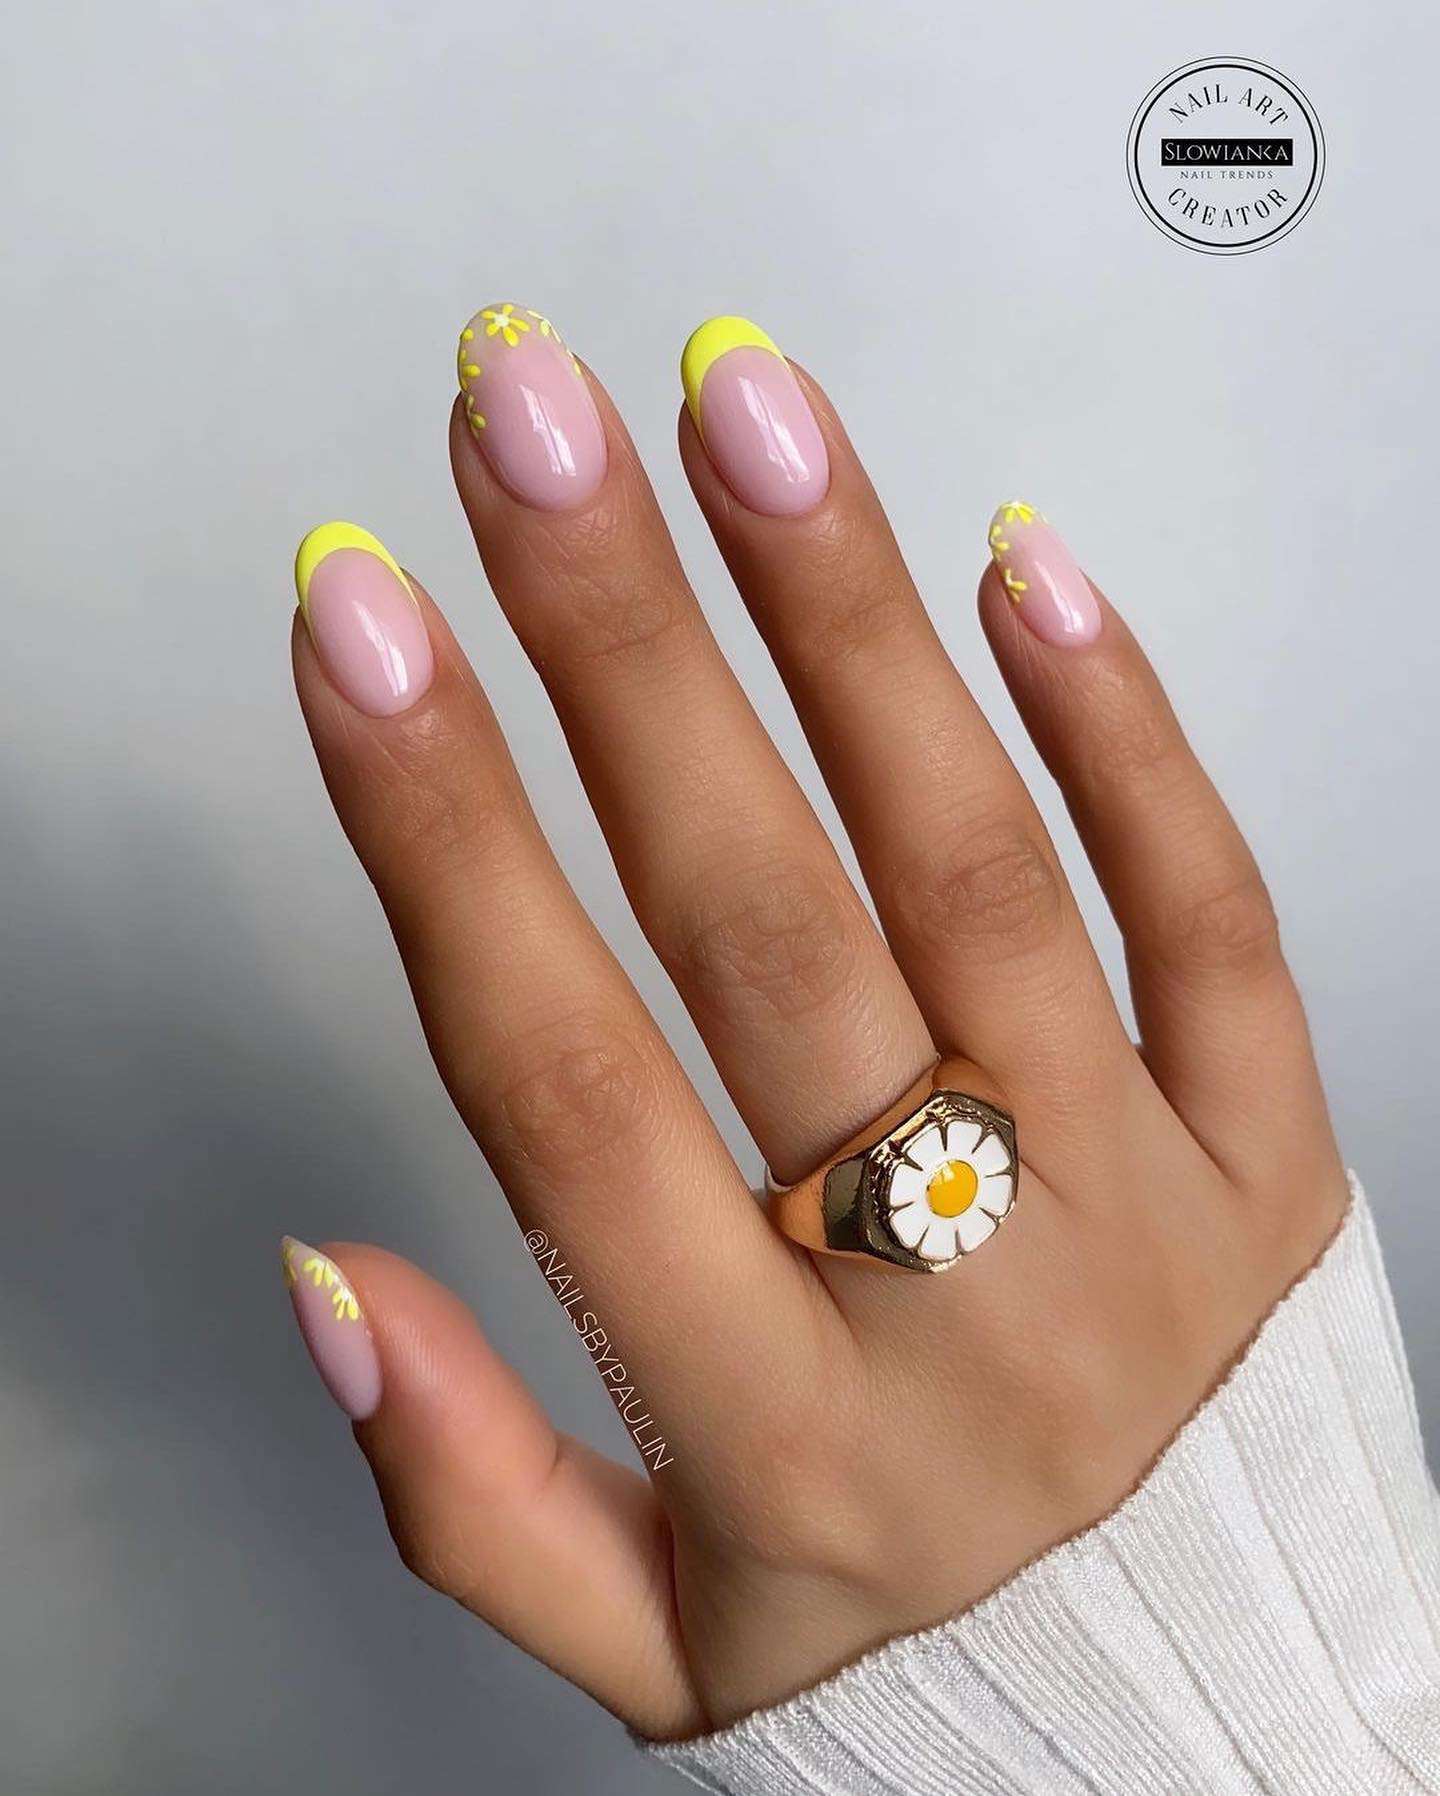 35 Nail Designs For 2022 You’ll Want To Try Immediately images 15